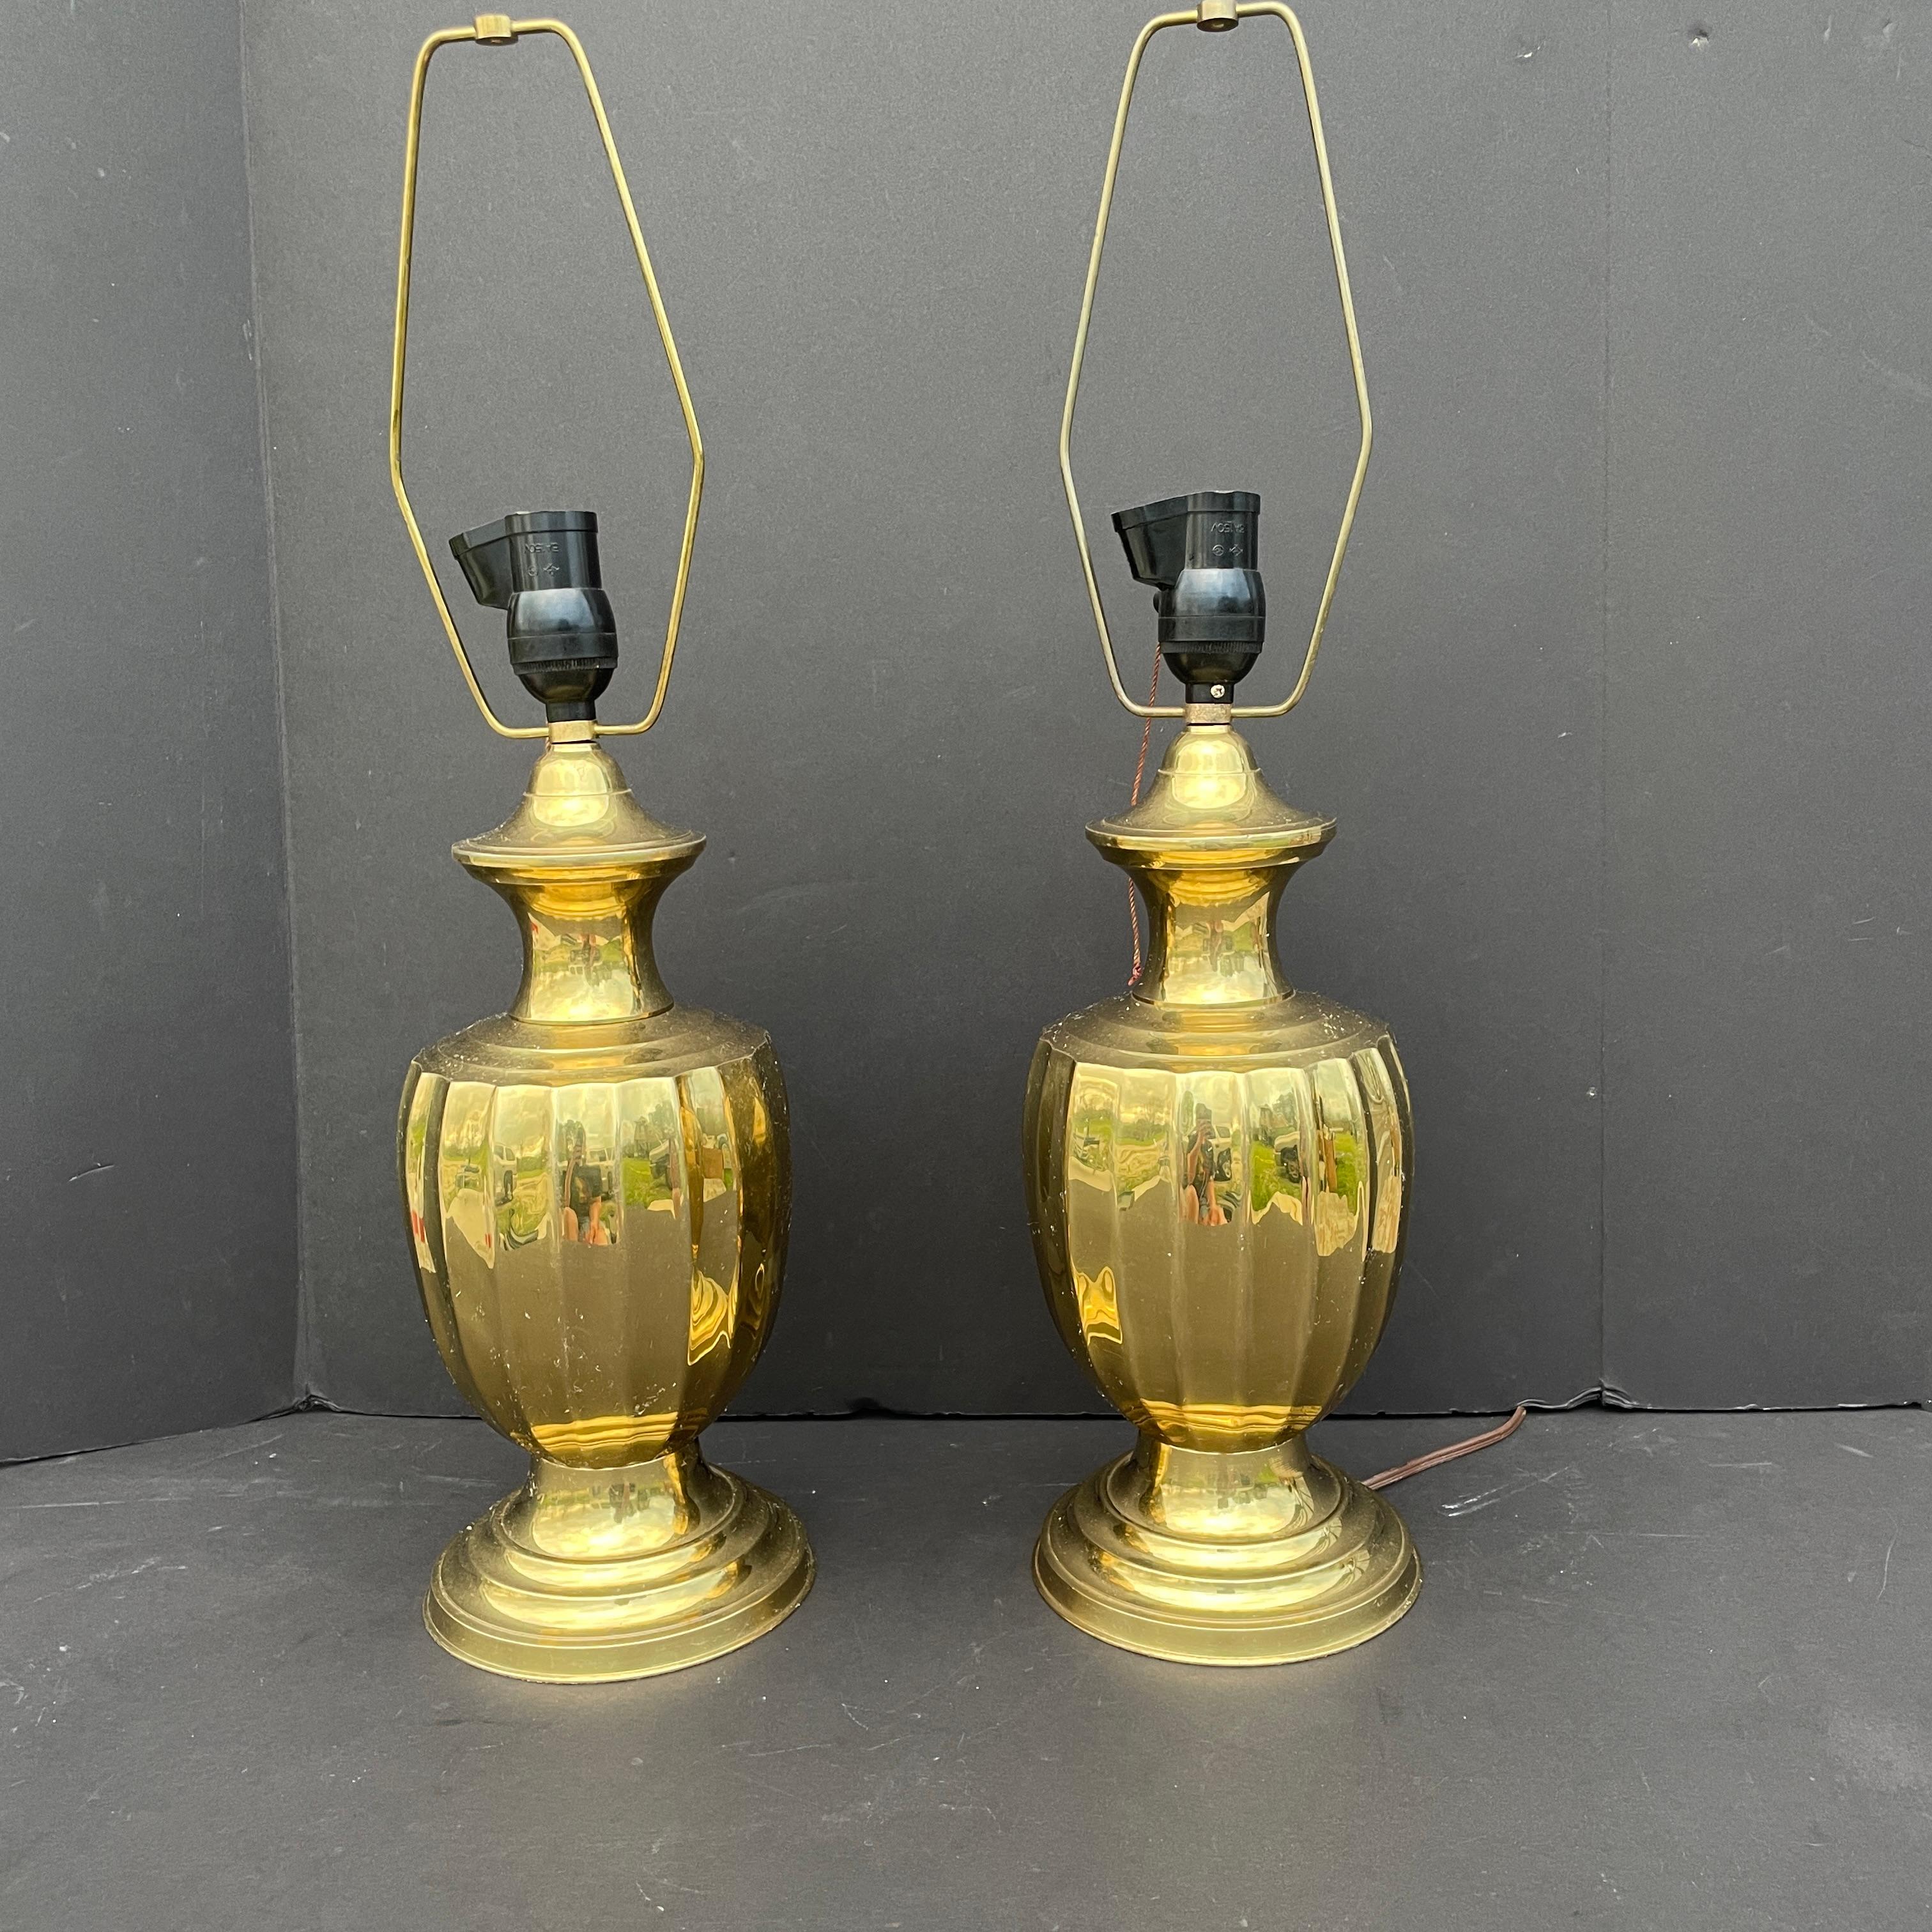 Genuine vintage pair of brass lamps attributed to Frederick Cooper. Polished and then lacquered will make these babies have a rich golden shine for many years to come. Lamps are fitted with a double light bulb allowing you more or less light as